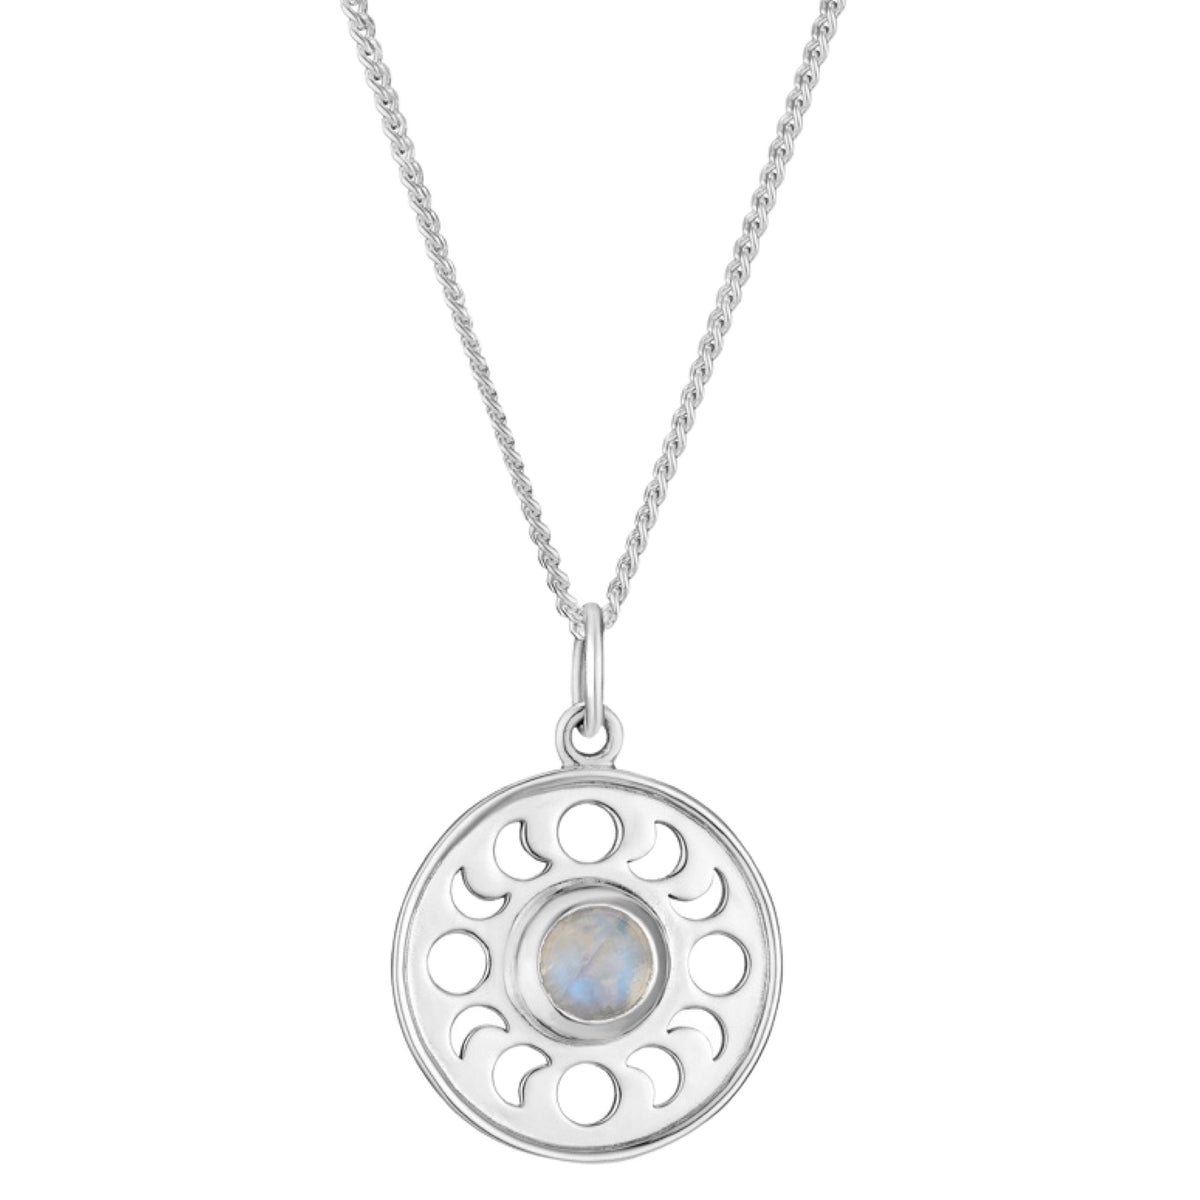 JUST A PHASE - Sterling Silver & Moonstone Necklace